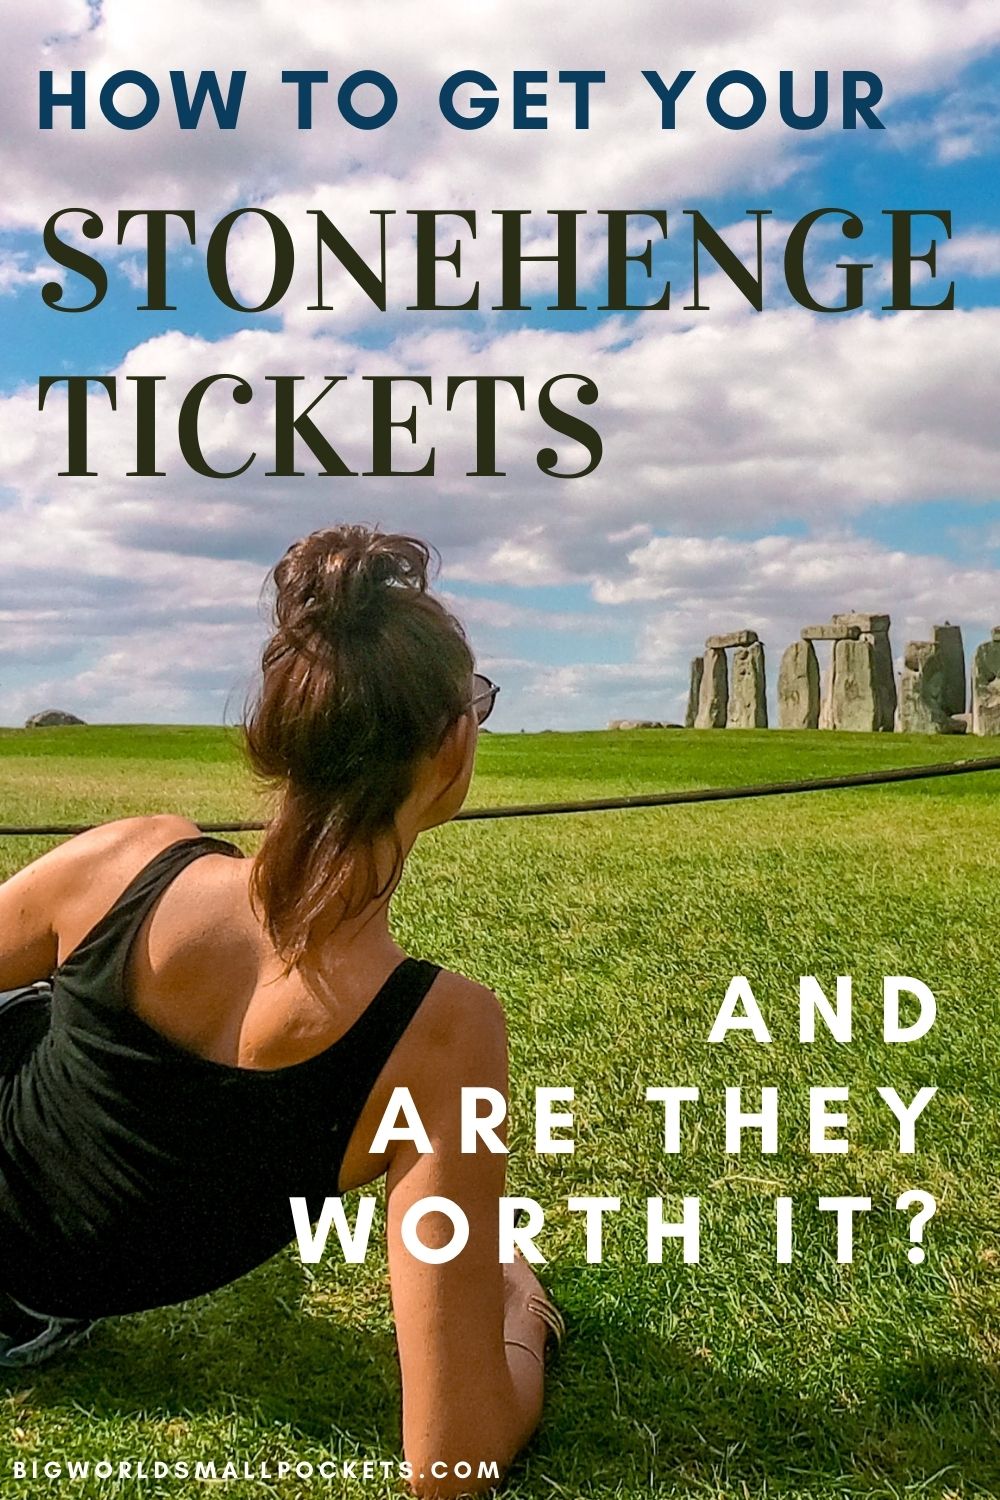 Guide to Getting Tickets for Stonehenge in England